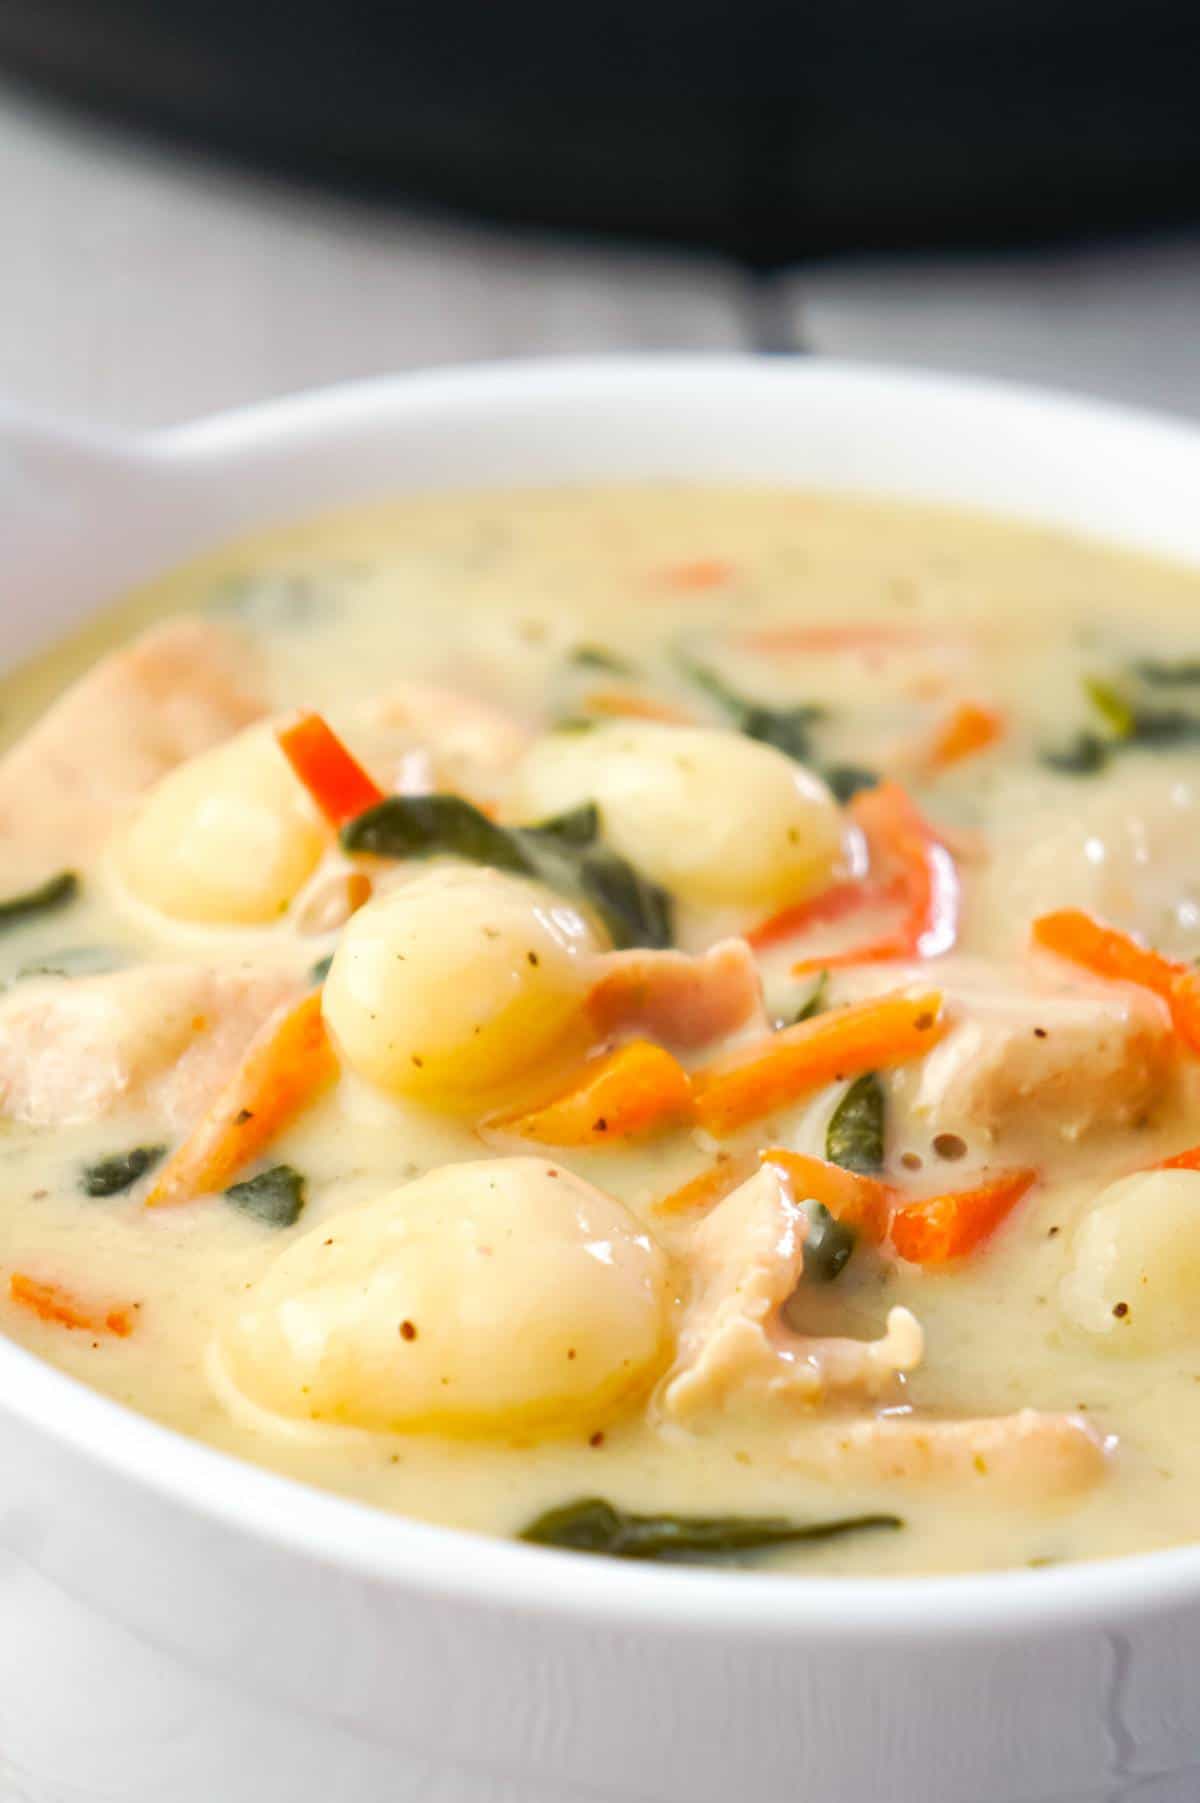 Instant Pot Chicken Gnocchi Soup is a hearty soup recipe loaded with chunks of chicken breast, potato gnocchi, carrots and shredded spinach.